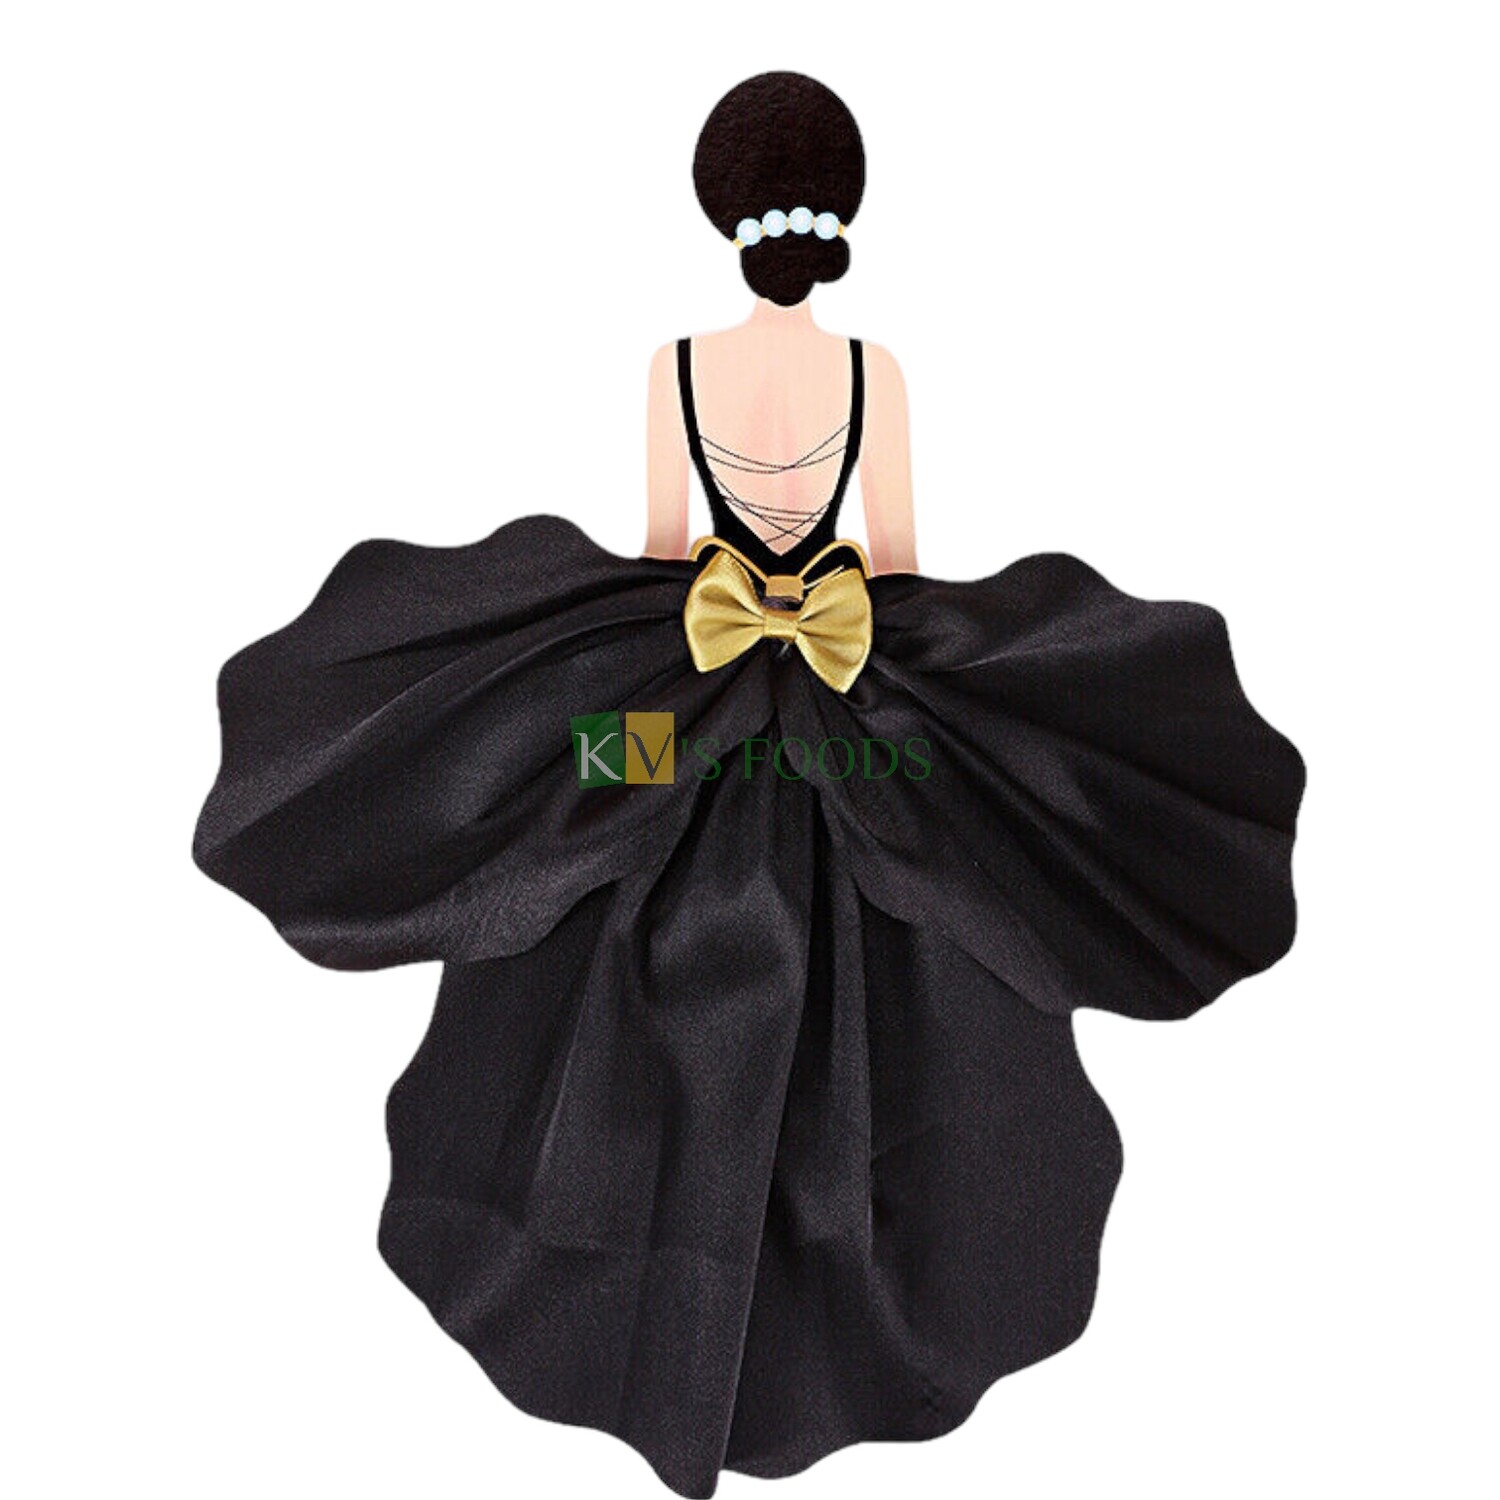 Girl Lady Women Back with Black Silk Chiffon Gauze Skirt Non-Woven Fabric Cake Topper for Bride Wedding, Mother's Day, Women's Day Theme, Cake Topper Insert Cake Decoration Accessories DIY Cake Decor